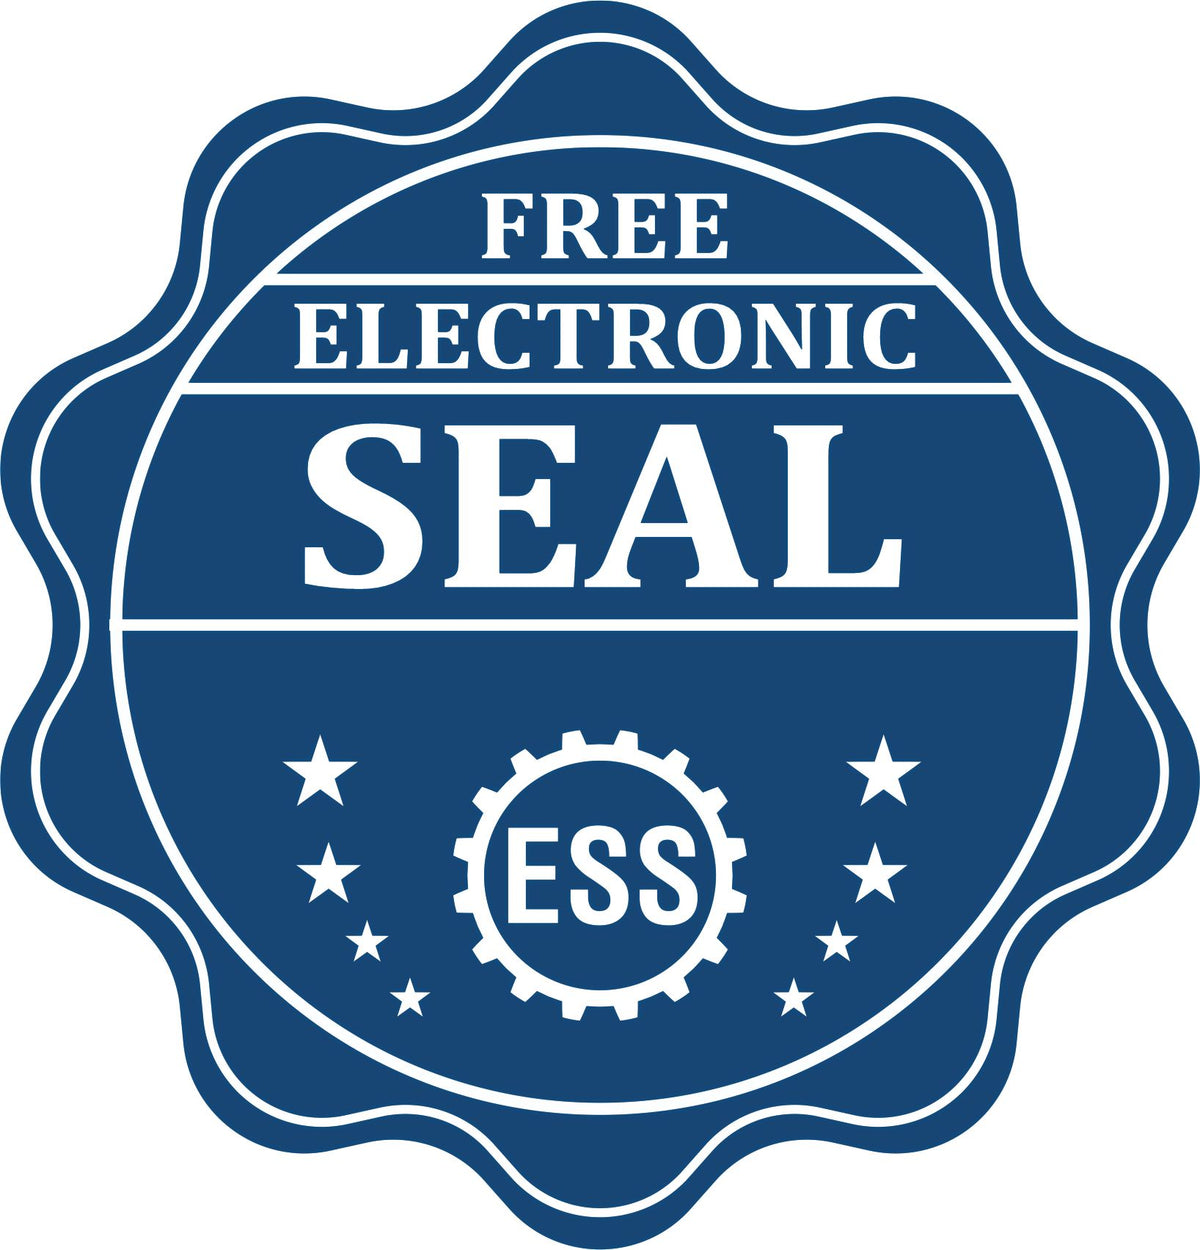 A badge showing a free electronic seal for the Slim Pre-Inked Georgia Land Surveyor Seal Stamp with stars and the ESS gear on the emblem.